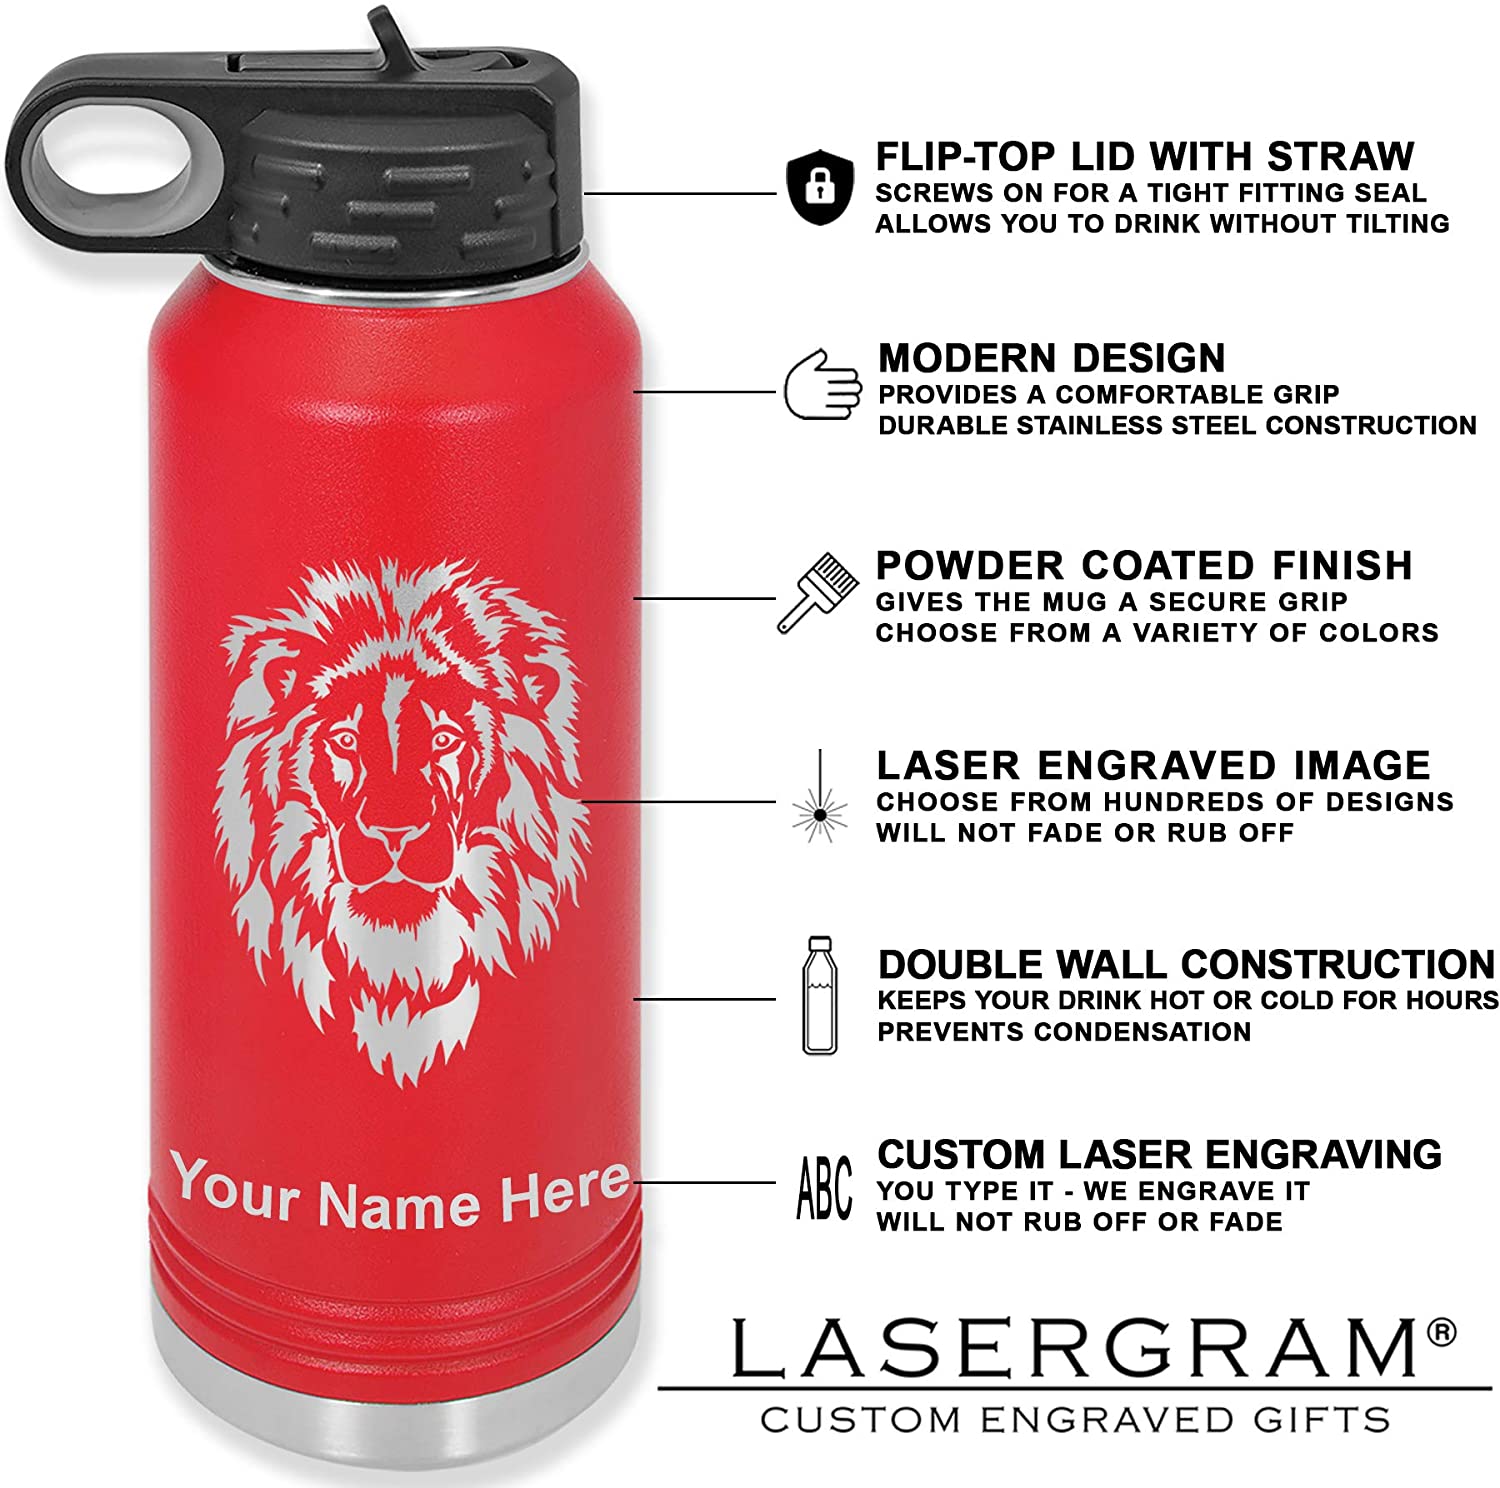 College and University Logo Water Bottles